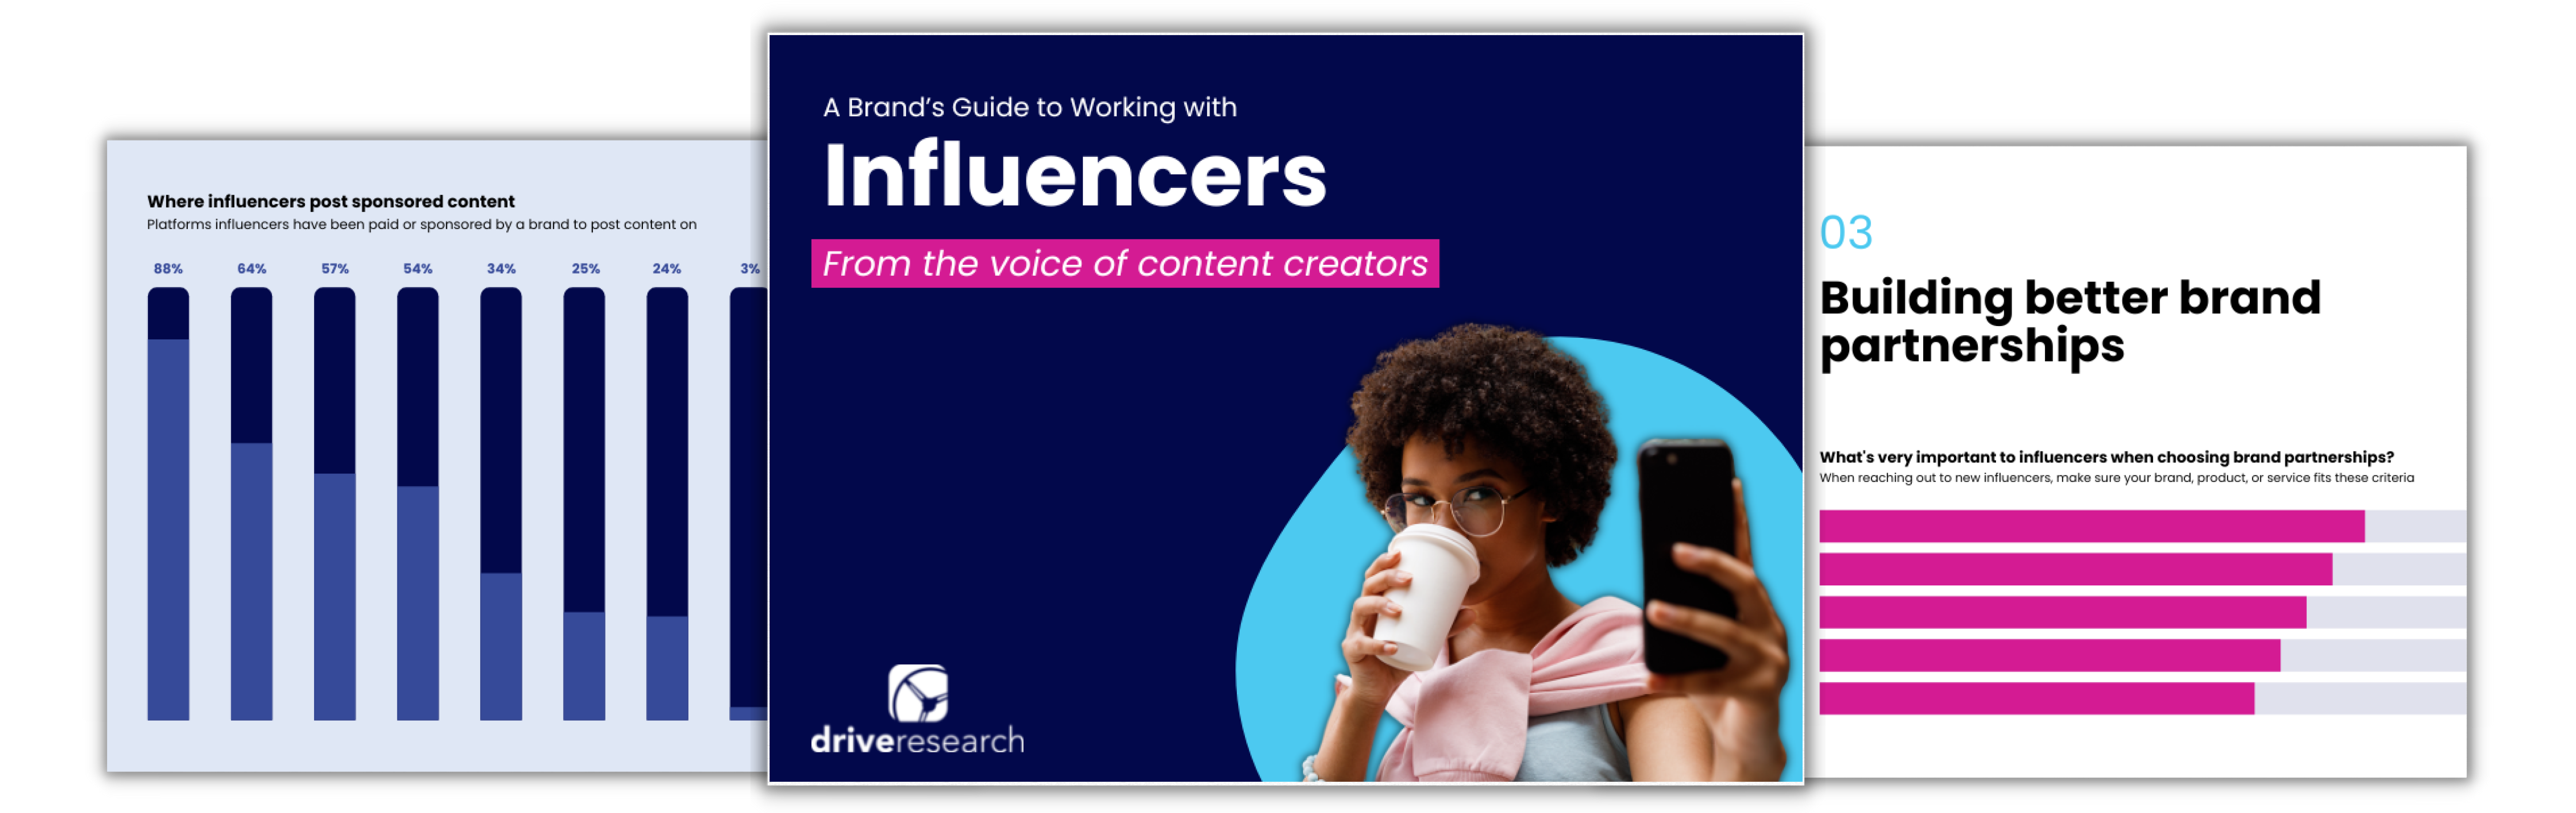 CTA A brand's guide to working with influencers